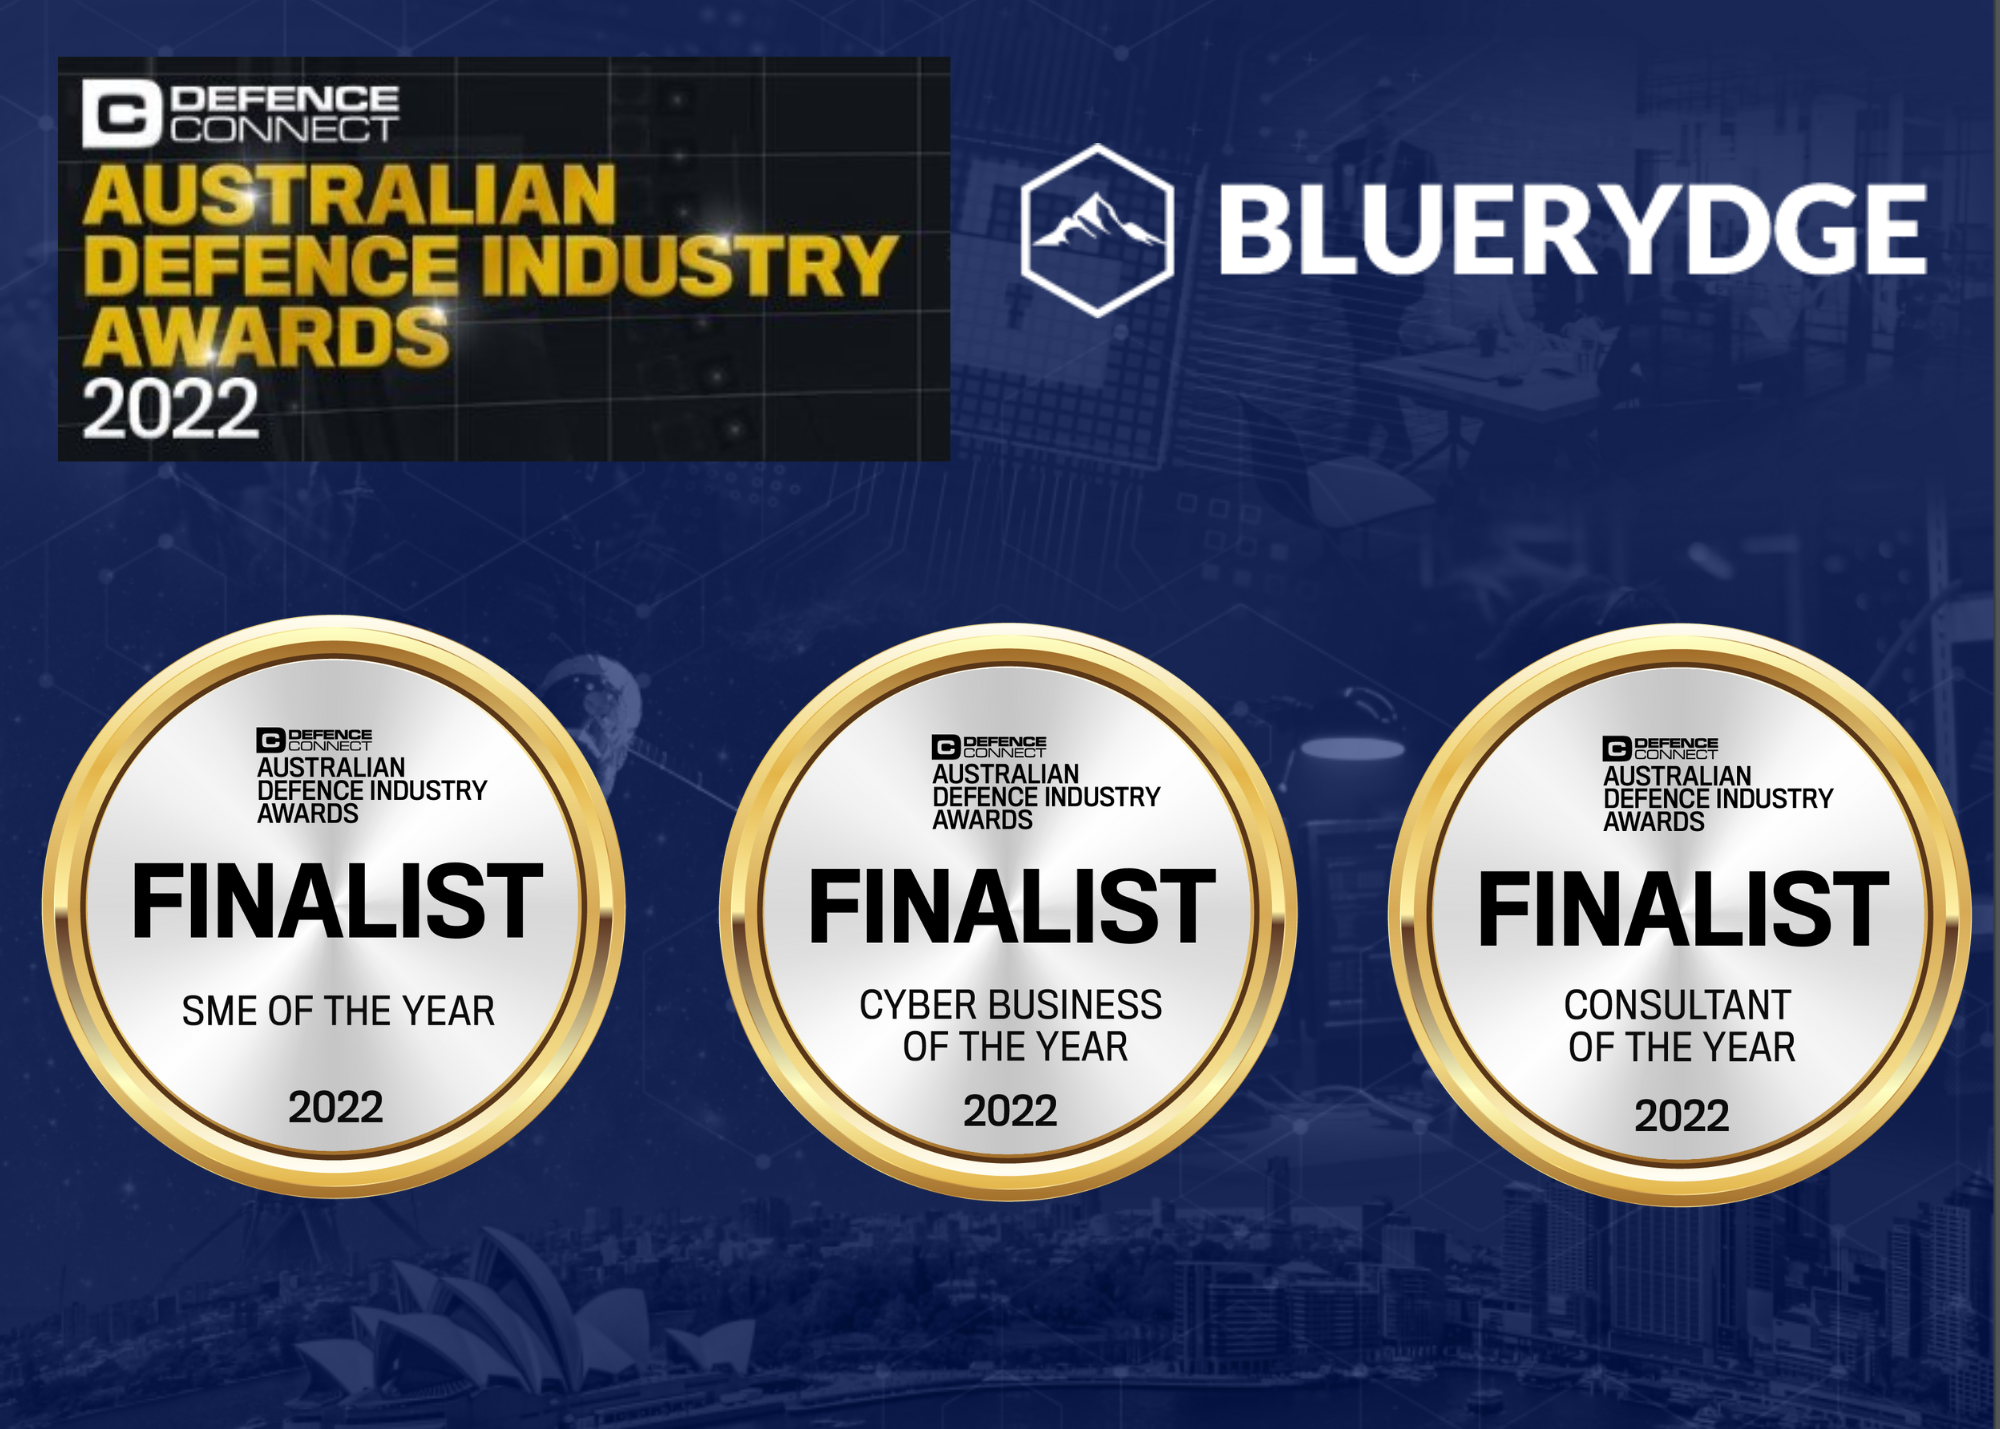 Bluerydge is Finalist in the Australian Defence Industry Awards 2022